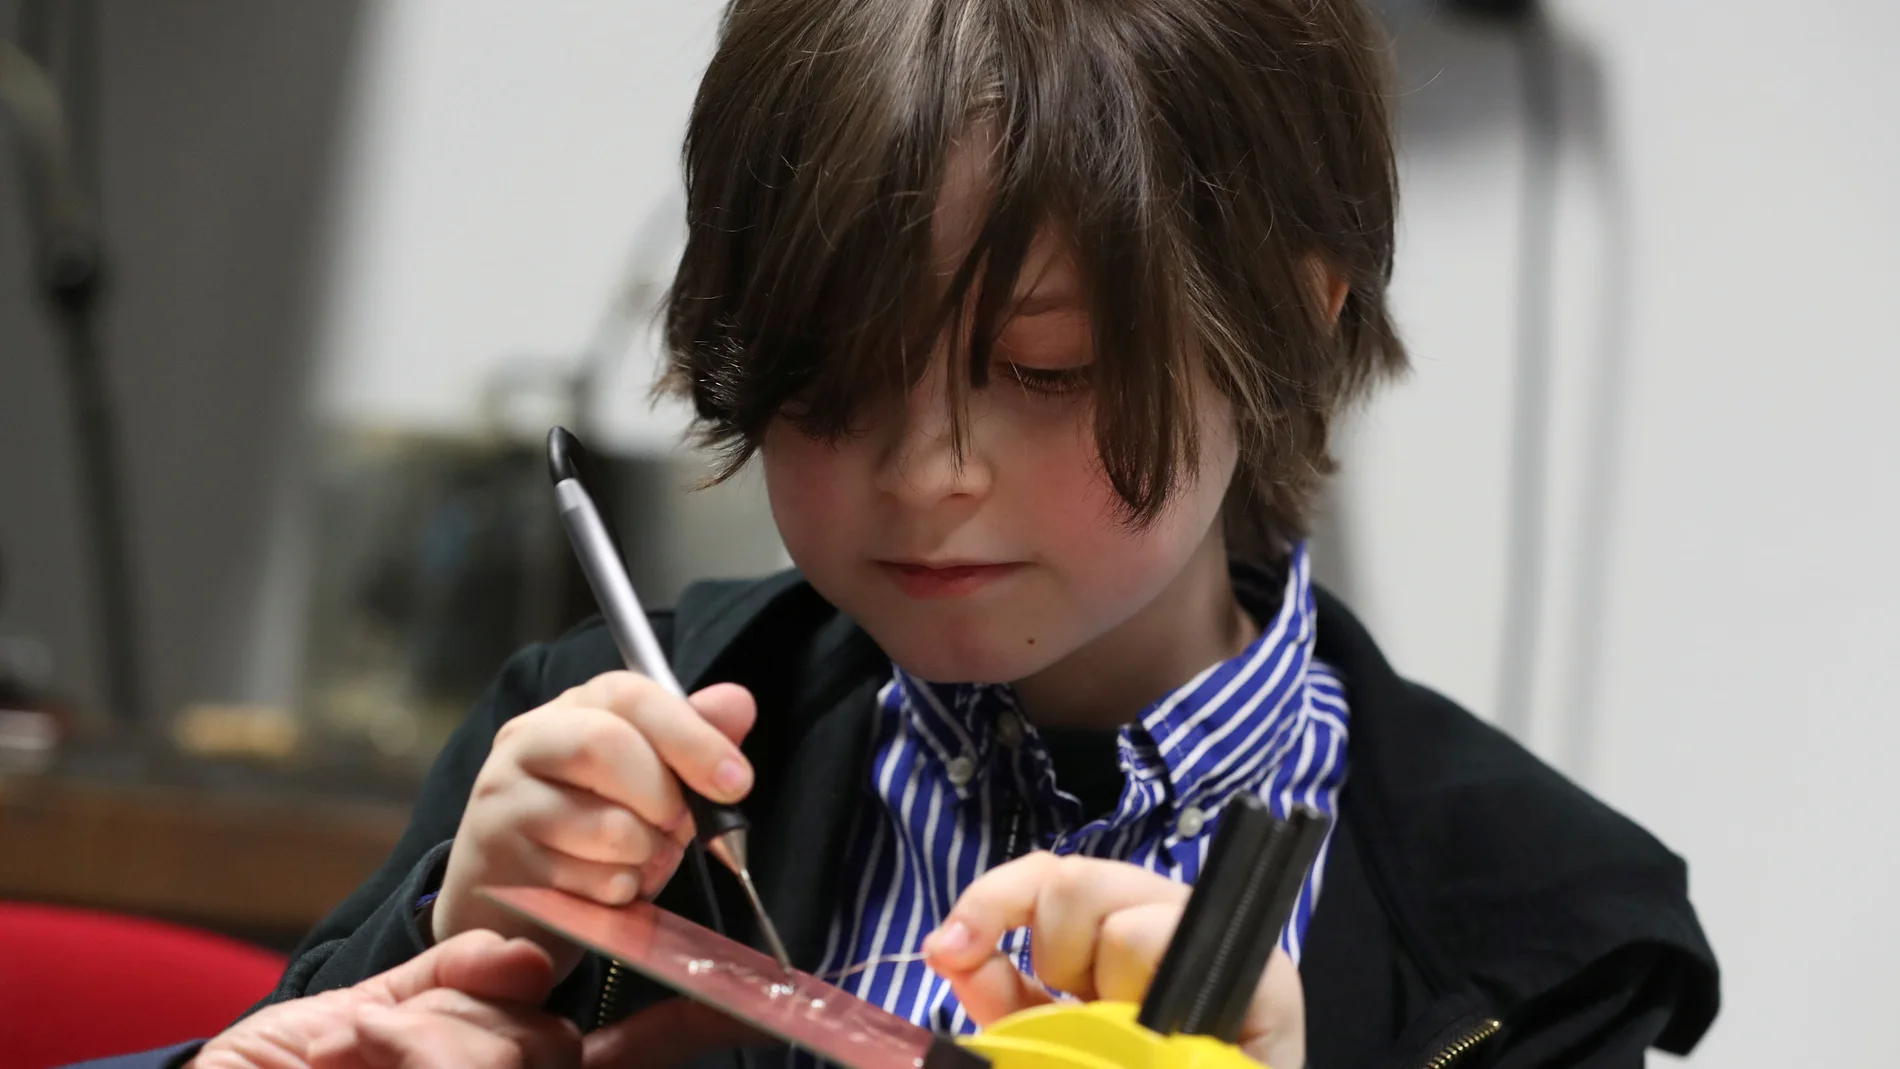 Nine-year-old Belgian student Laurent Simons at the University of Technology in Eindhoven